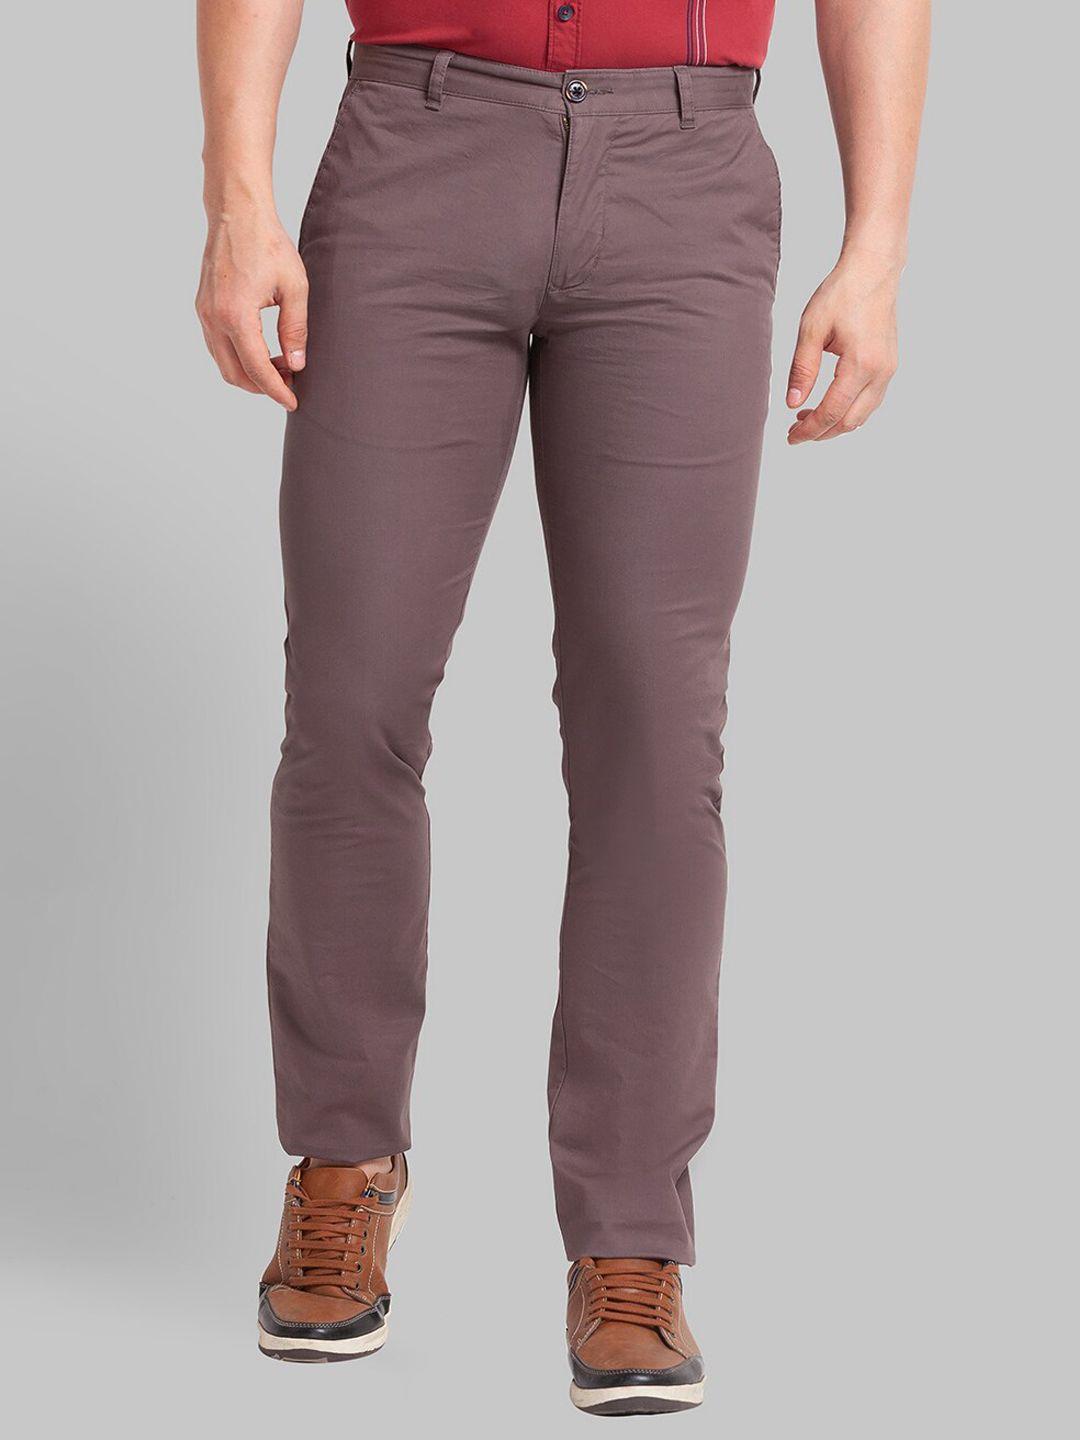 parx-men-brown-tapered-fit-trousers